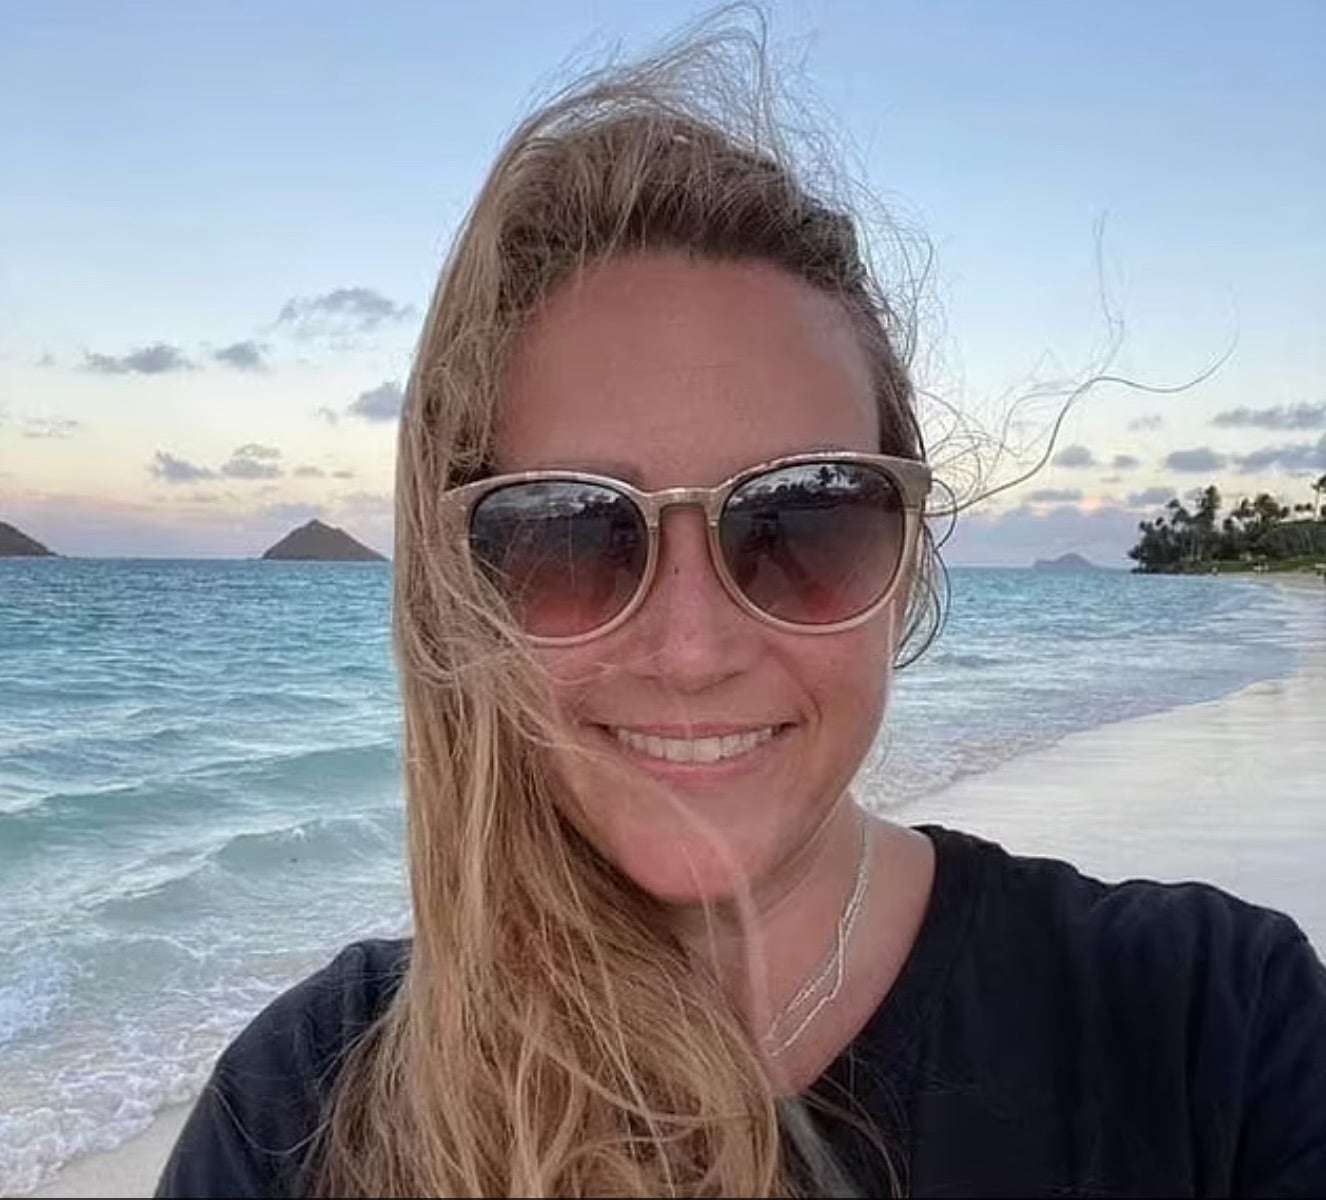 The body of teacher Amanda Webster, 44, was found in Puerto Rico